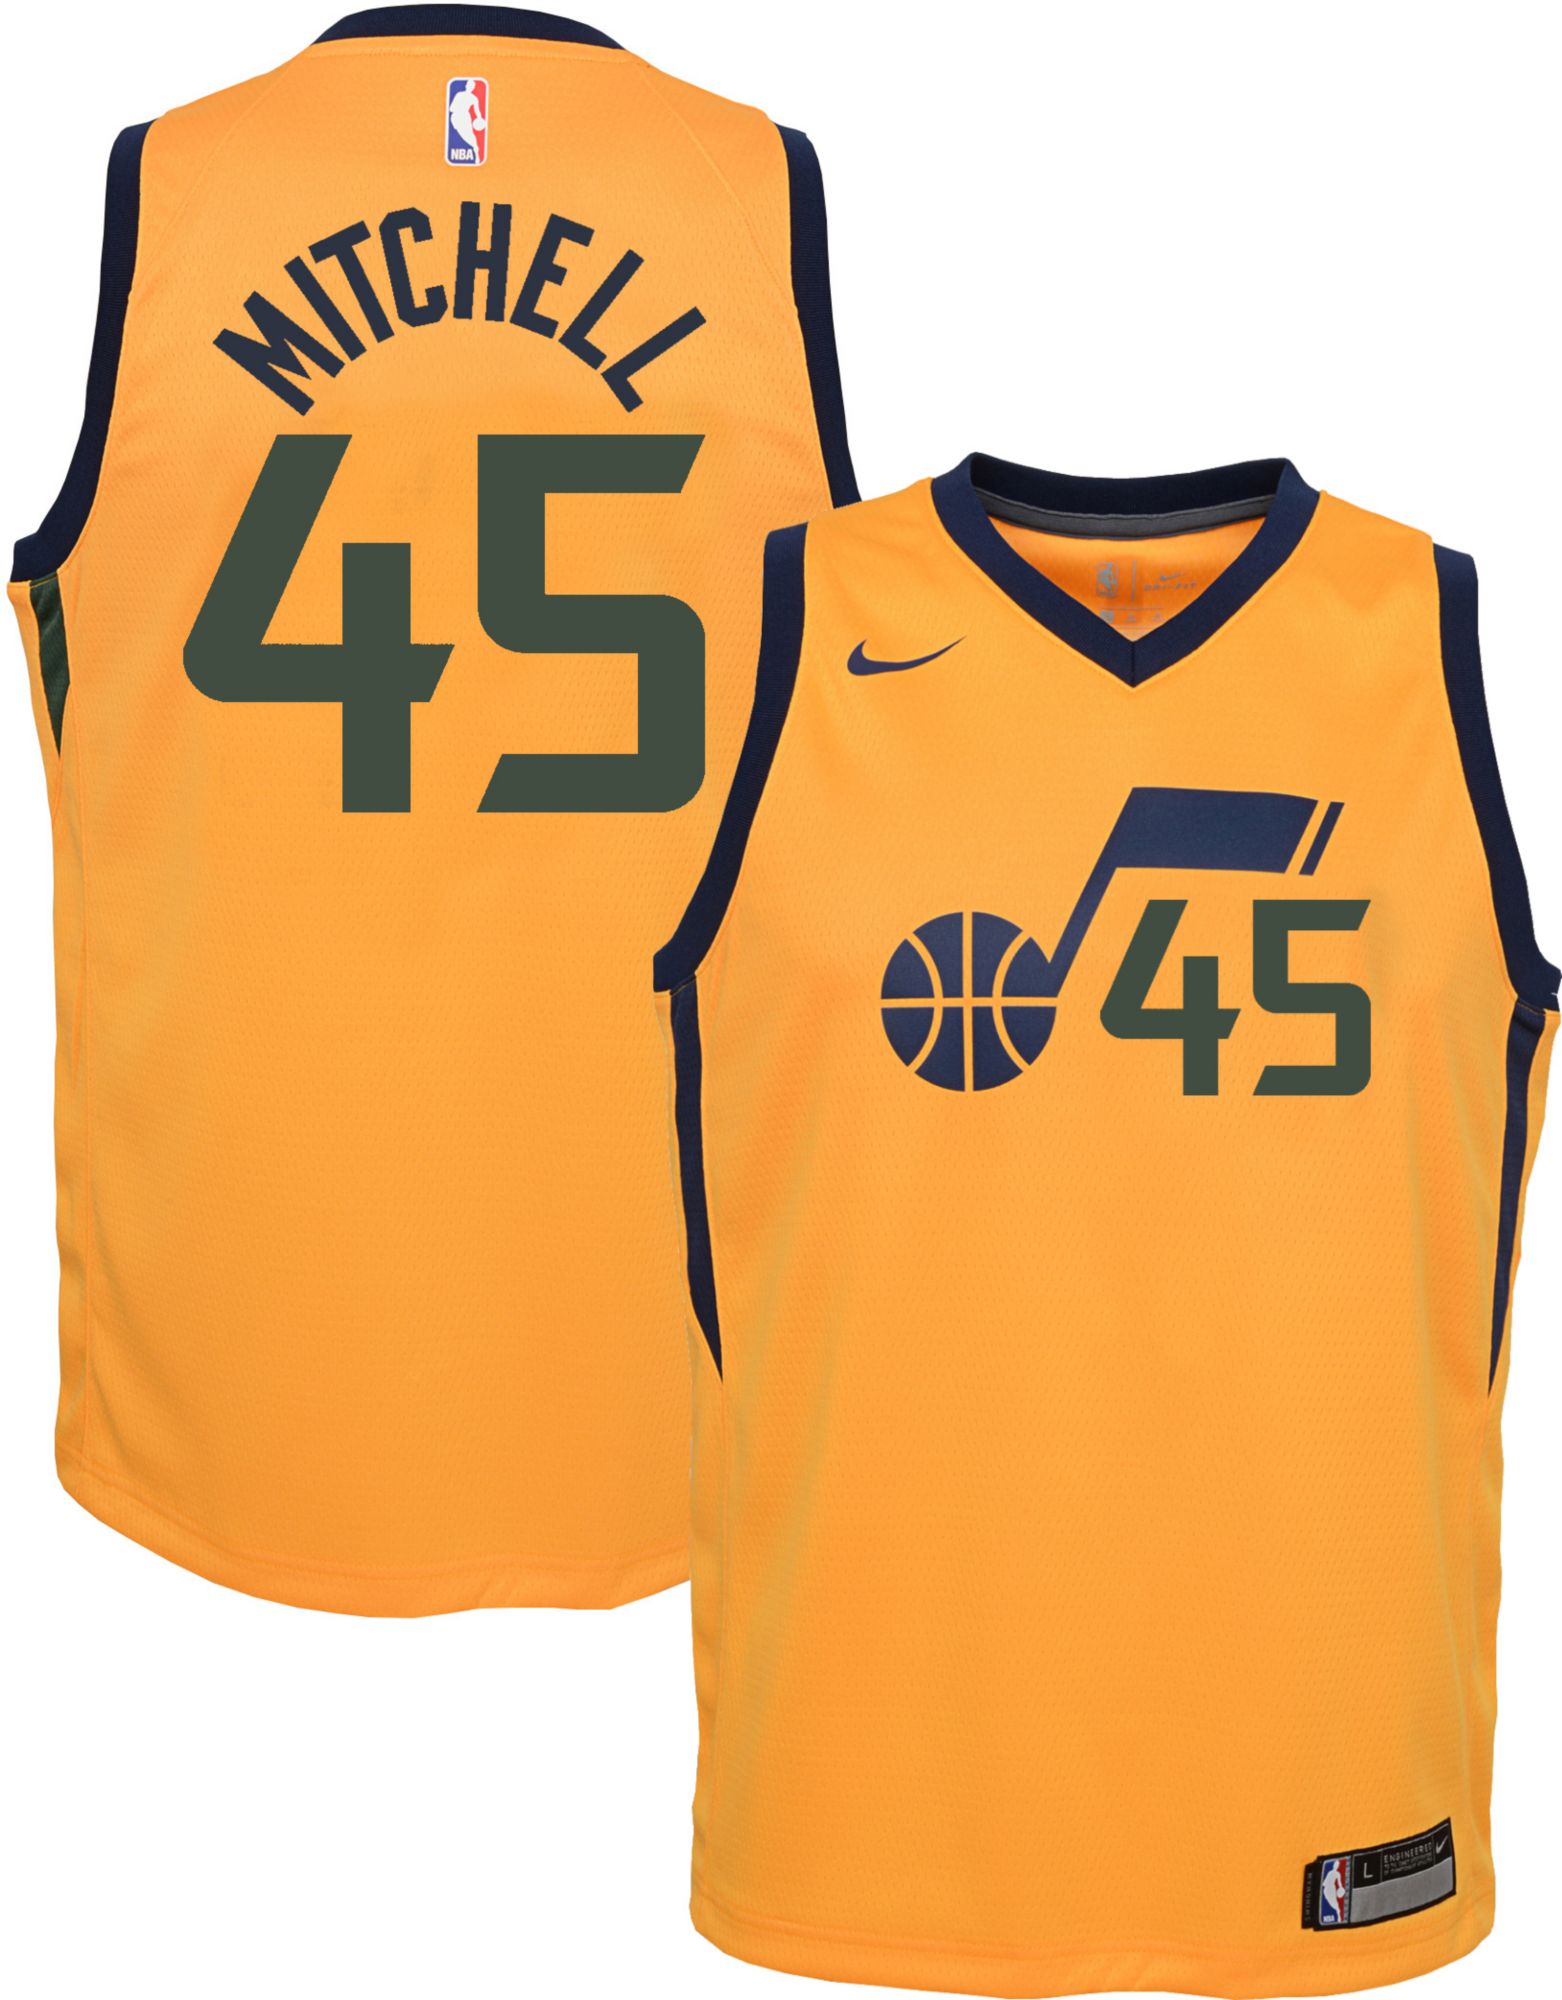 youth donovan mitchell jersey